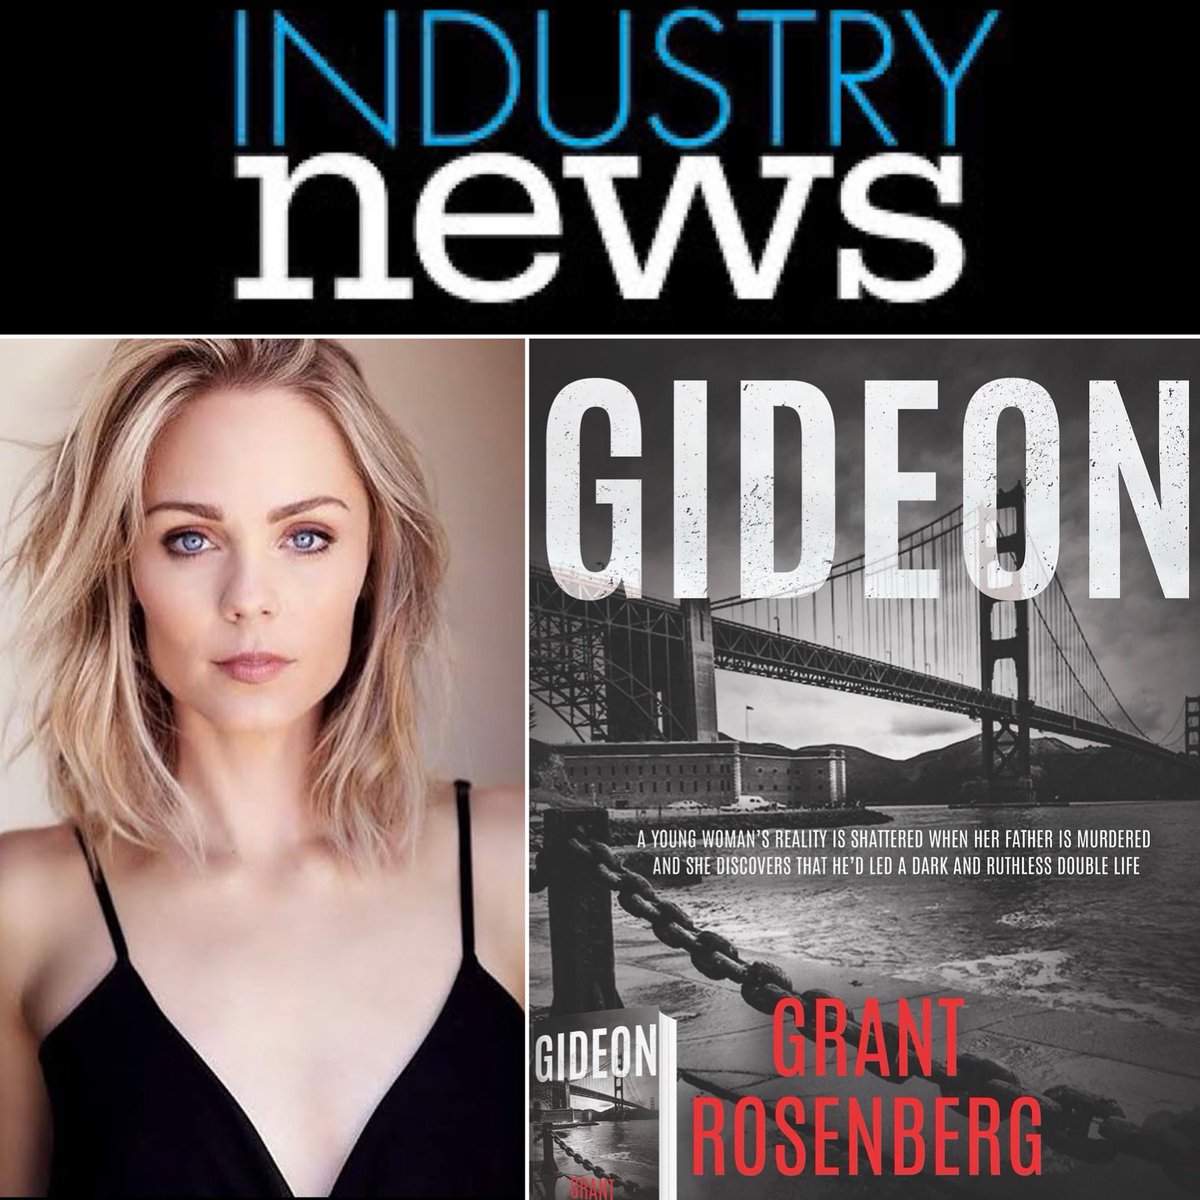 I am overjoyed 2announce that my production company has optioned the rights to the incredible trilogy book series #Gideon by #grantrosenberg We are excited to begin the development of this story and look forward to seeing where it goes. Stay tuned! More news to come!